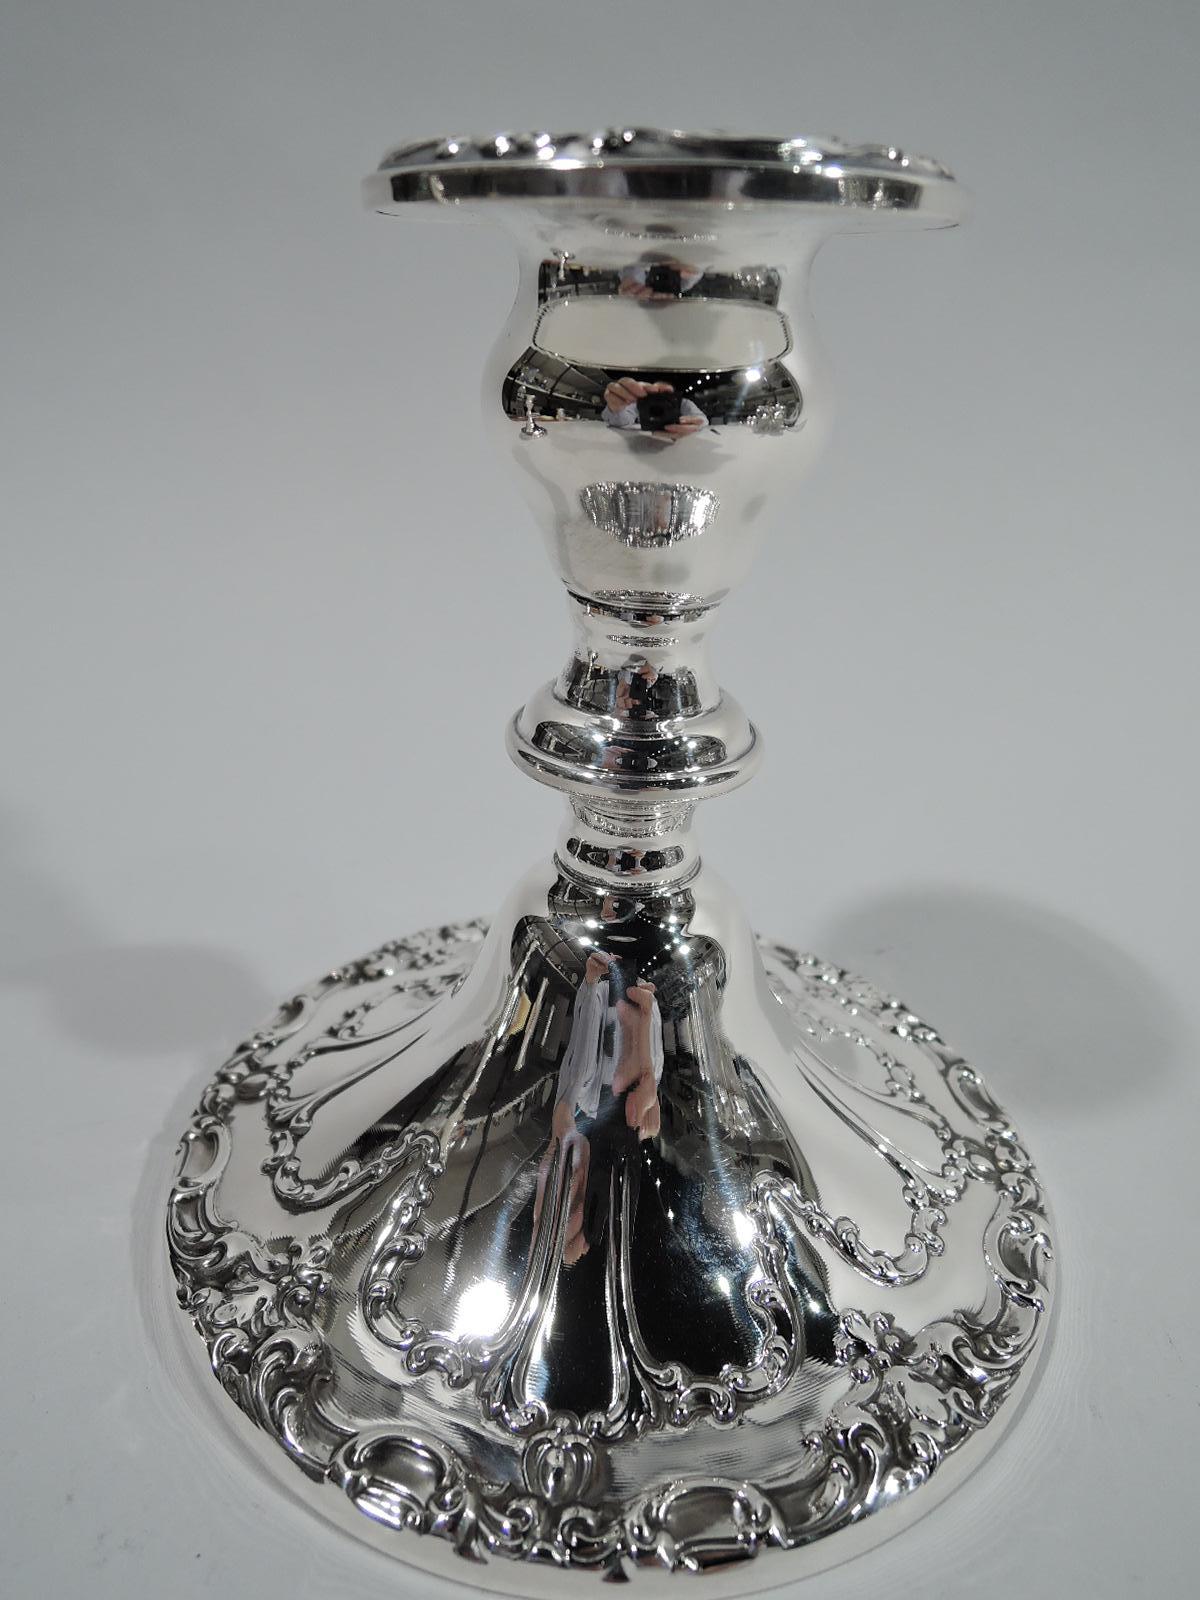 Pair of Chantilly-Duchess sterling silver low-candlesticks. Made by Gorham in Providence. Each: Urn socket, knopped support, and raised and round foot. Low-relief scroll and flower ornament. A sweet house-warming gift. Fully marked including no.